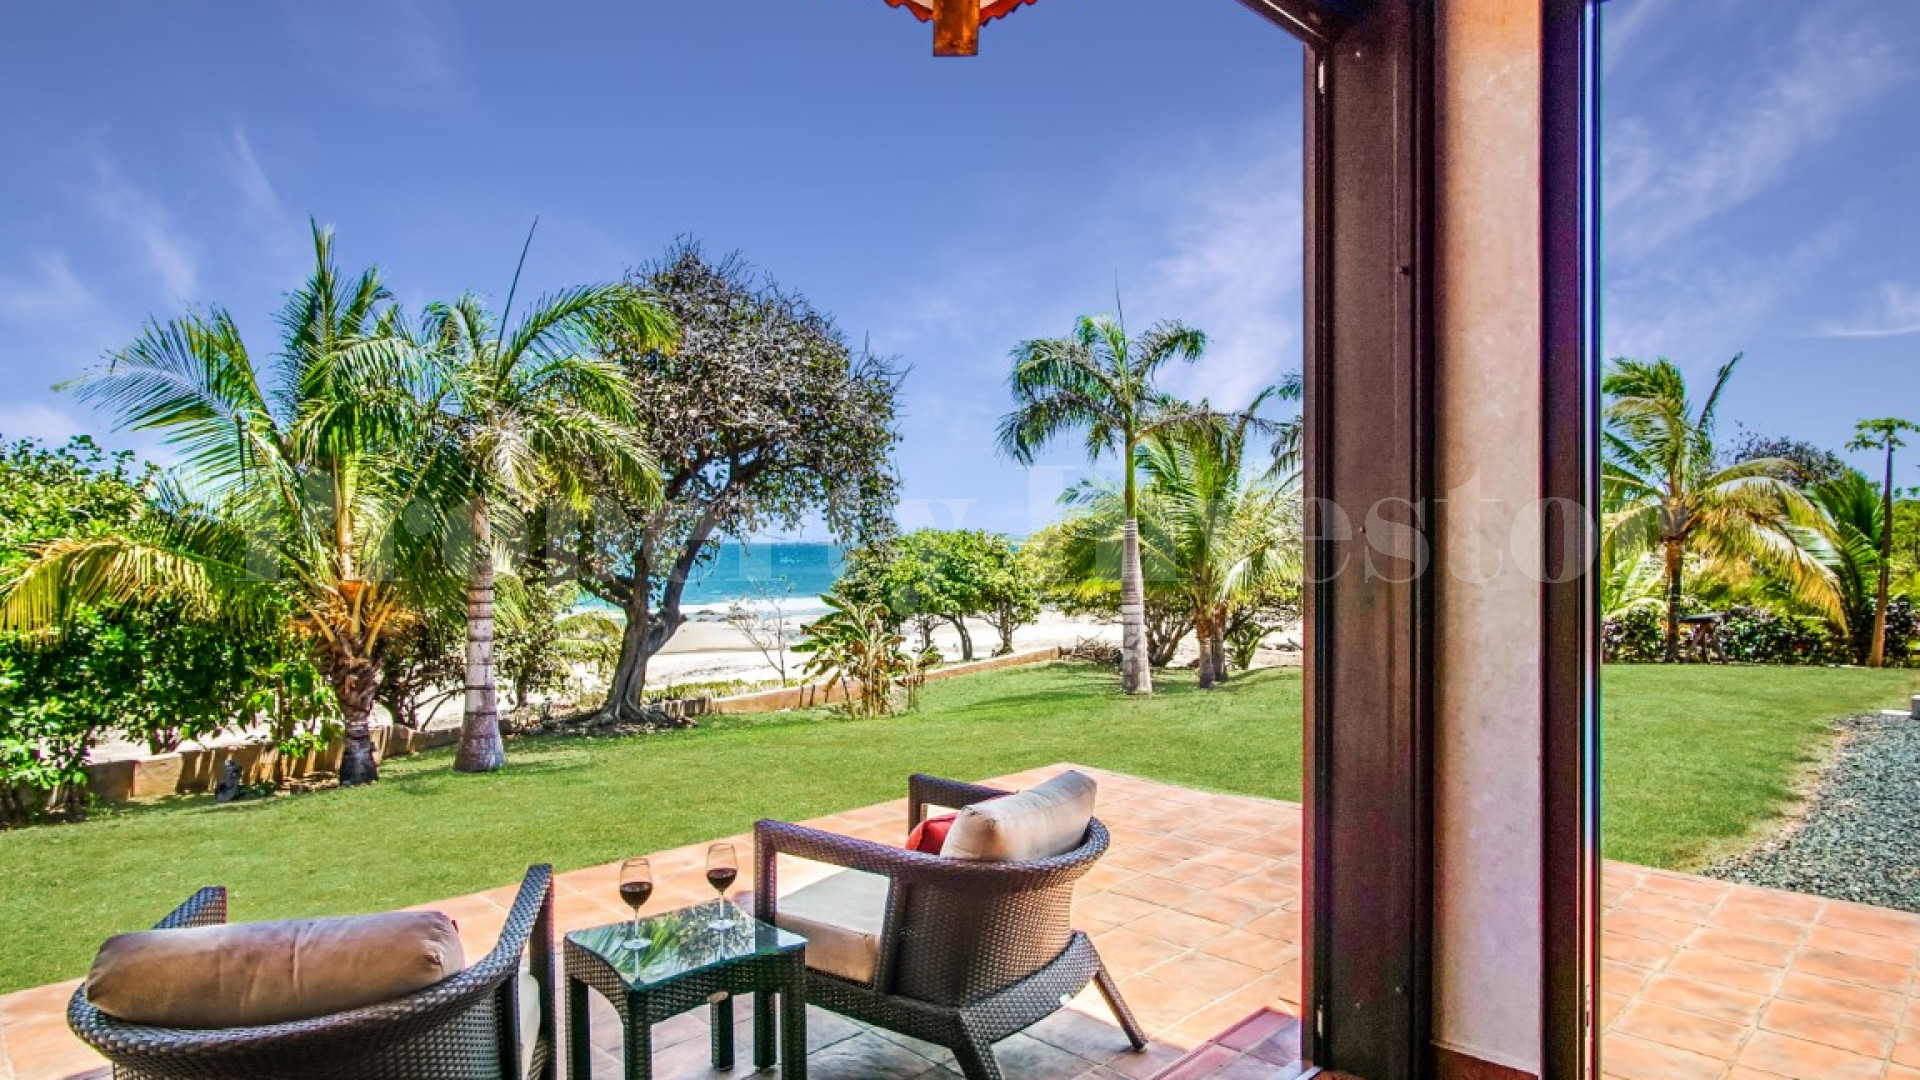 Spectacular 3 Bedroom Beachfront Home for Sale in Pedasi, Panama